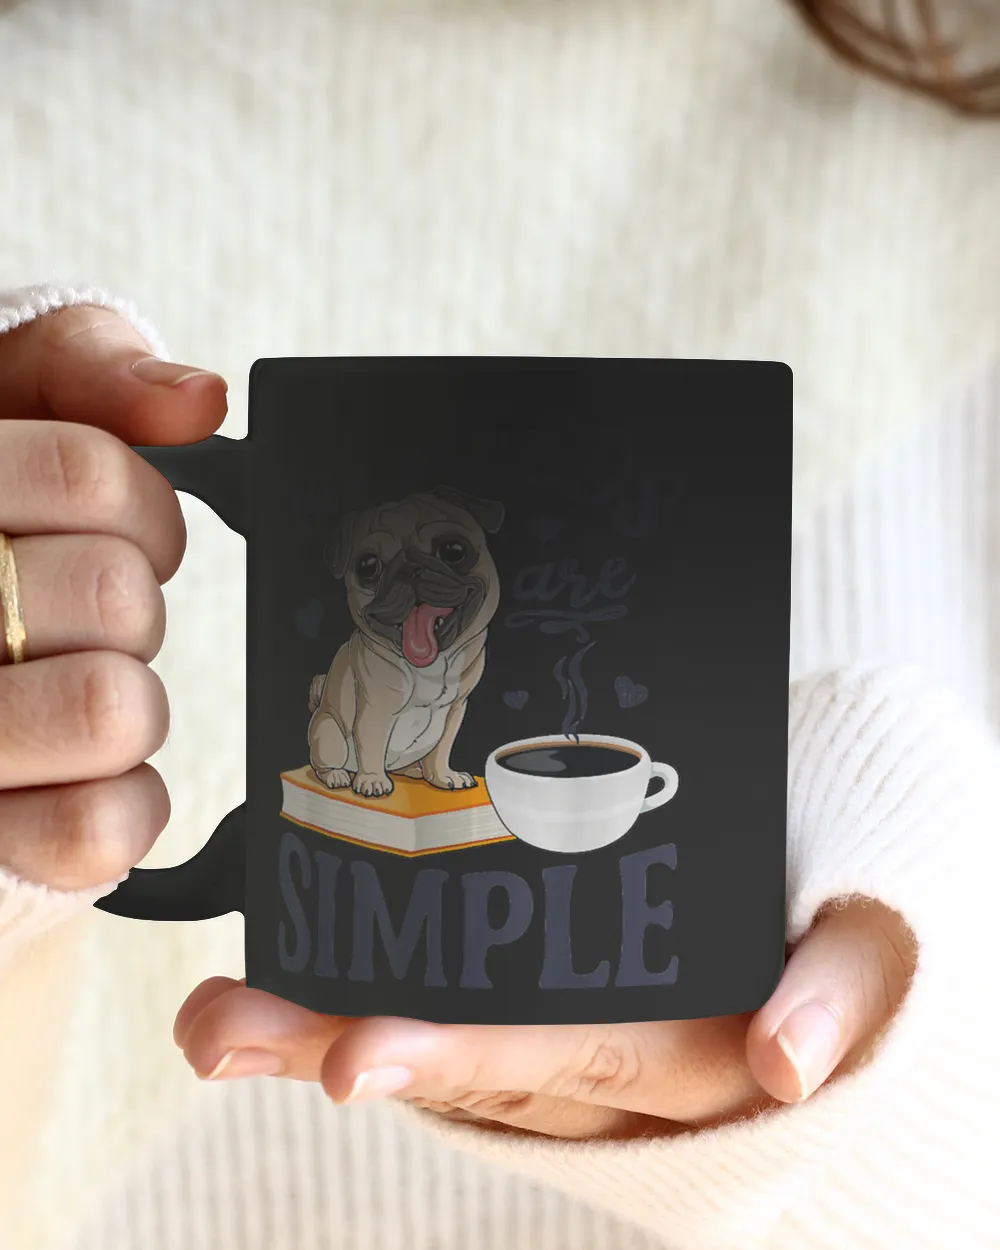 Book Reader My Needs Are Simple Pug Funny Dog Book Coffee Lover Reading Library